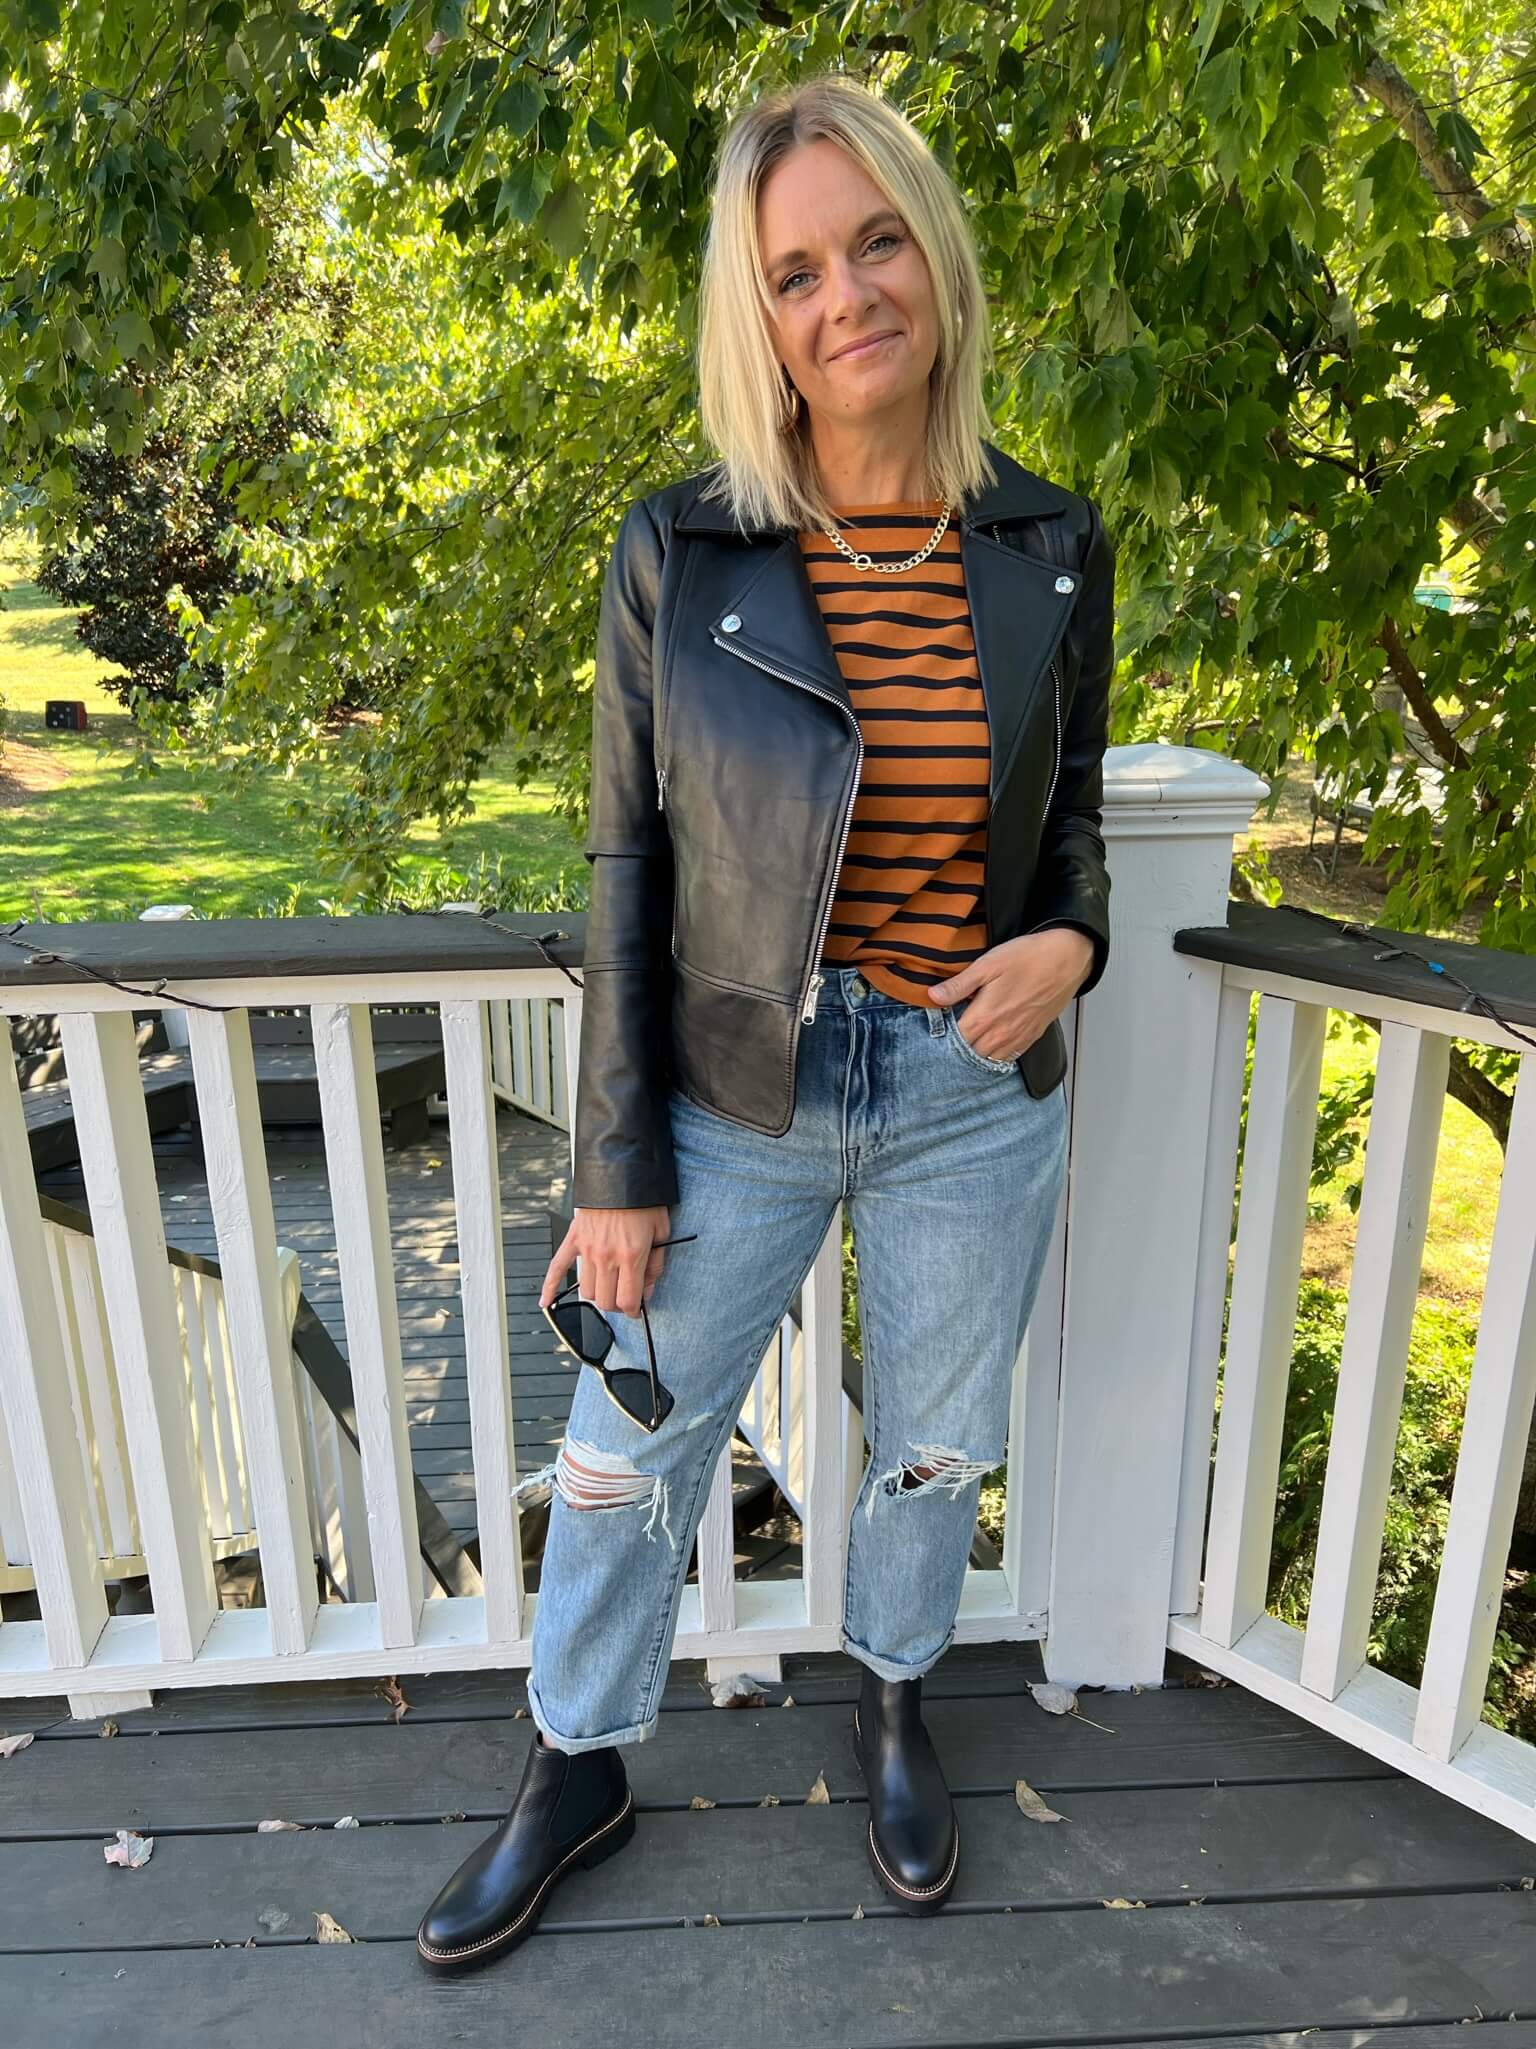 Nashville Personal Stylists Pick 3: Must Have Shoes For Winter moto jacket and Chelsea boots how to style Chelsea boots for winter how to wear Chelsea boots Nashville stylists share go to shoes for winter personal stylists talk winter shoe wardrobe